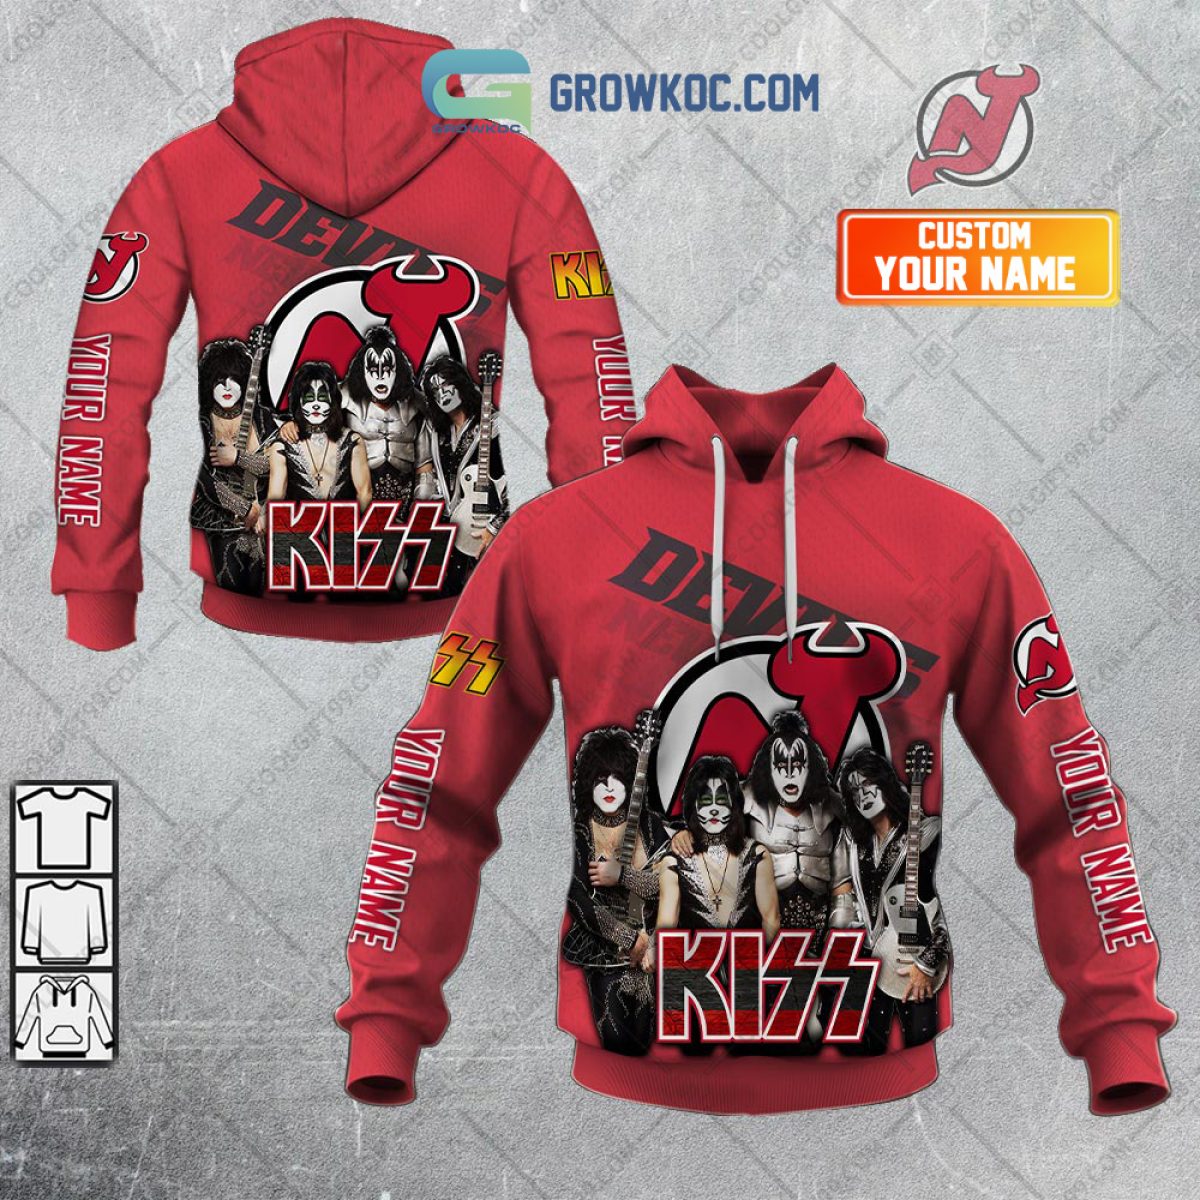 Another New New Jersey Devils Jersey ? - Page 3 - Hell - The Rock